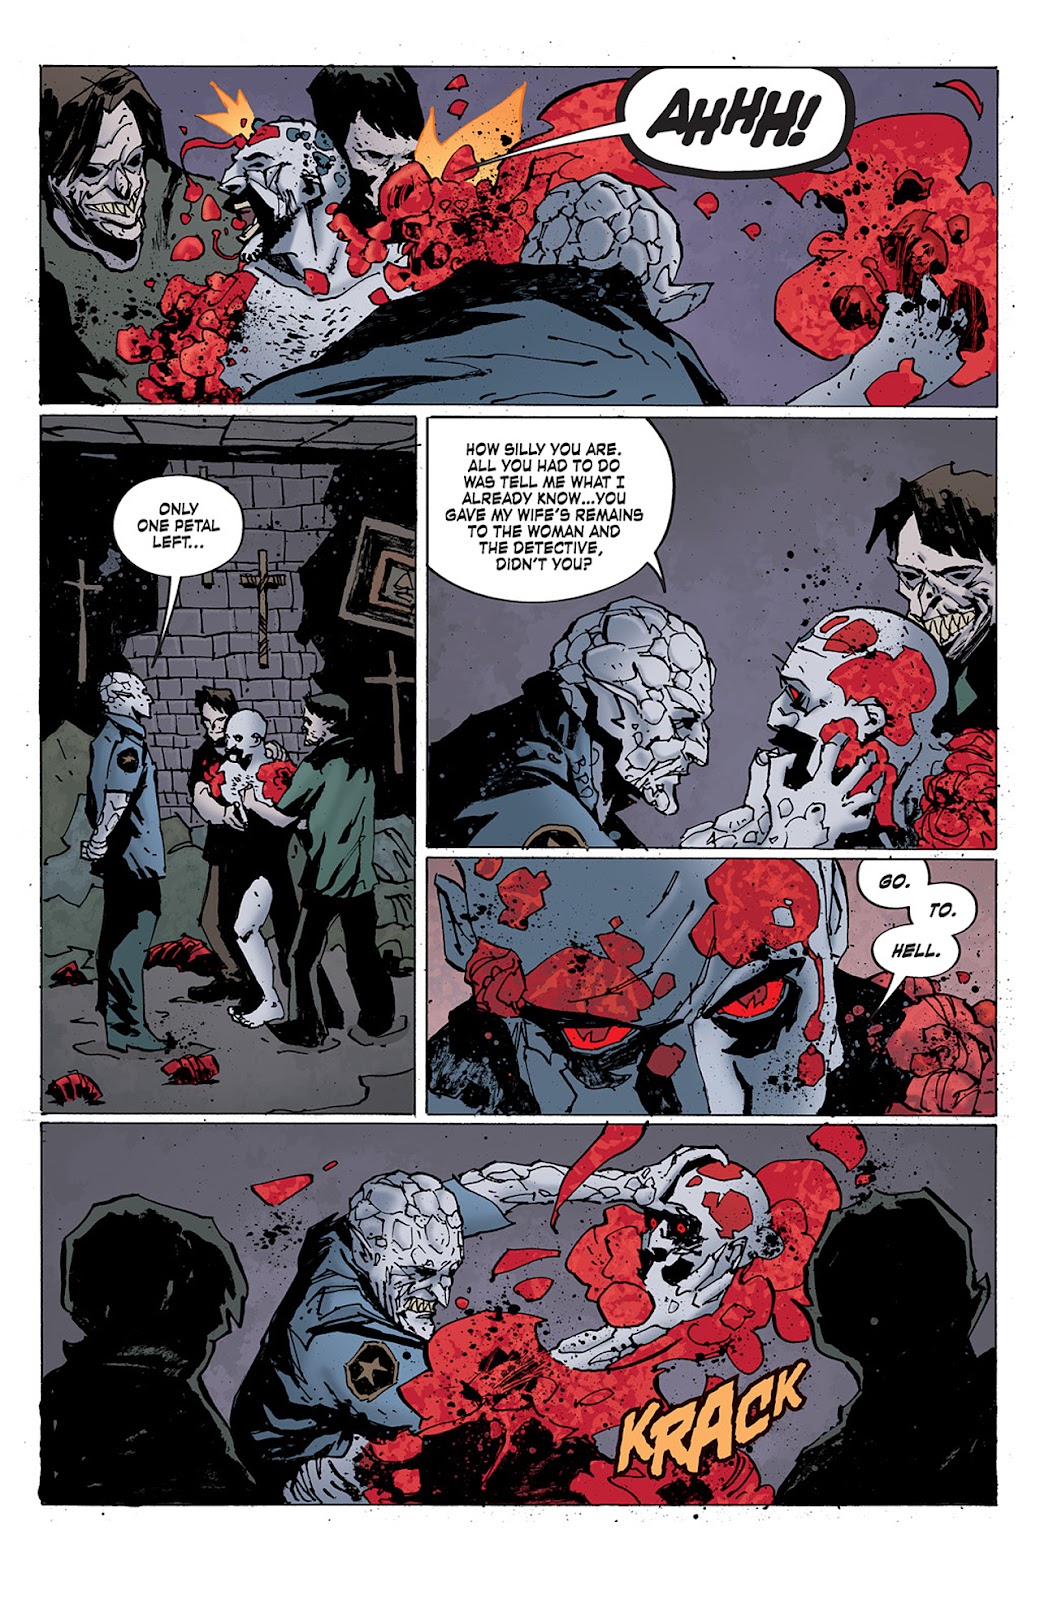 Criminal Macabre: Final Night - The 30 Days of Night Crossover issue 3 - Page 6